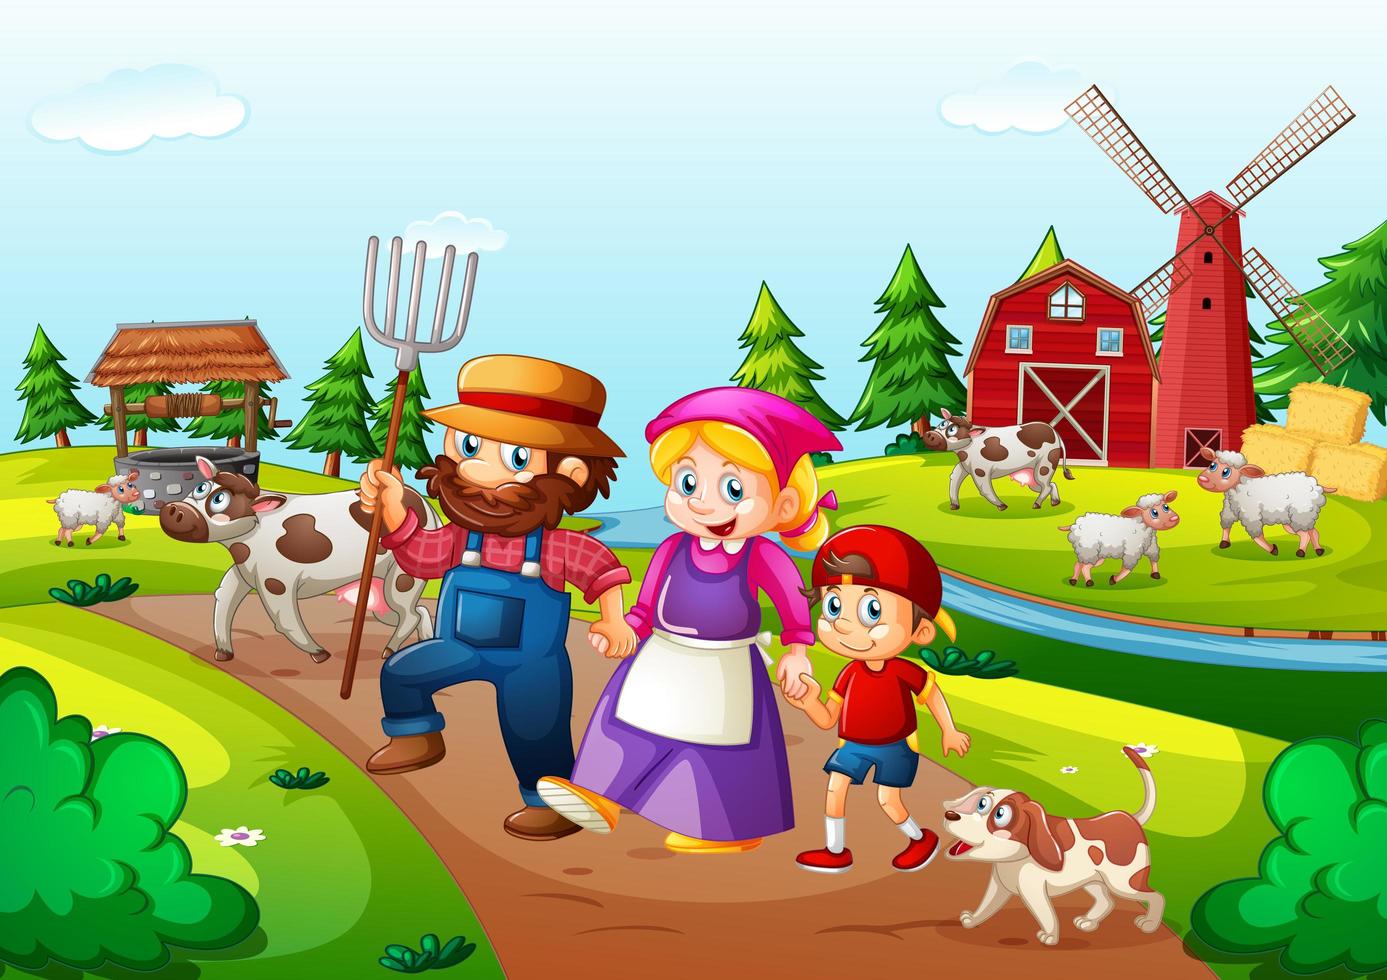 Farm with red barn and windmill scene vector